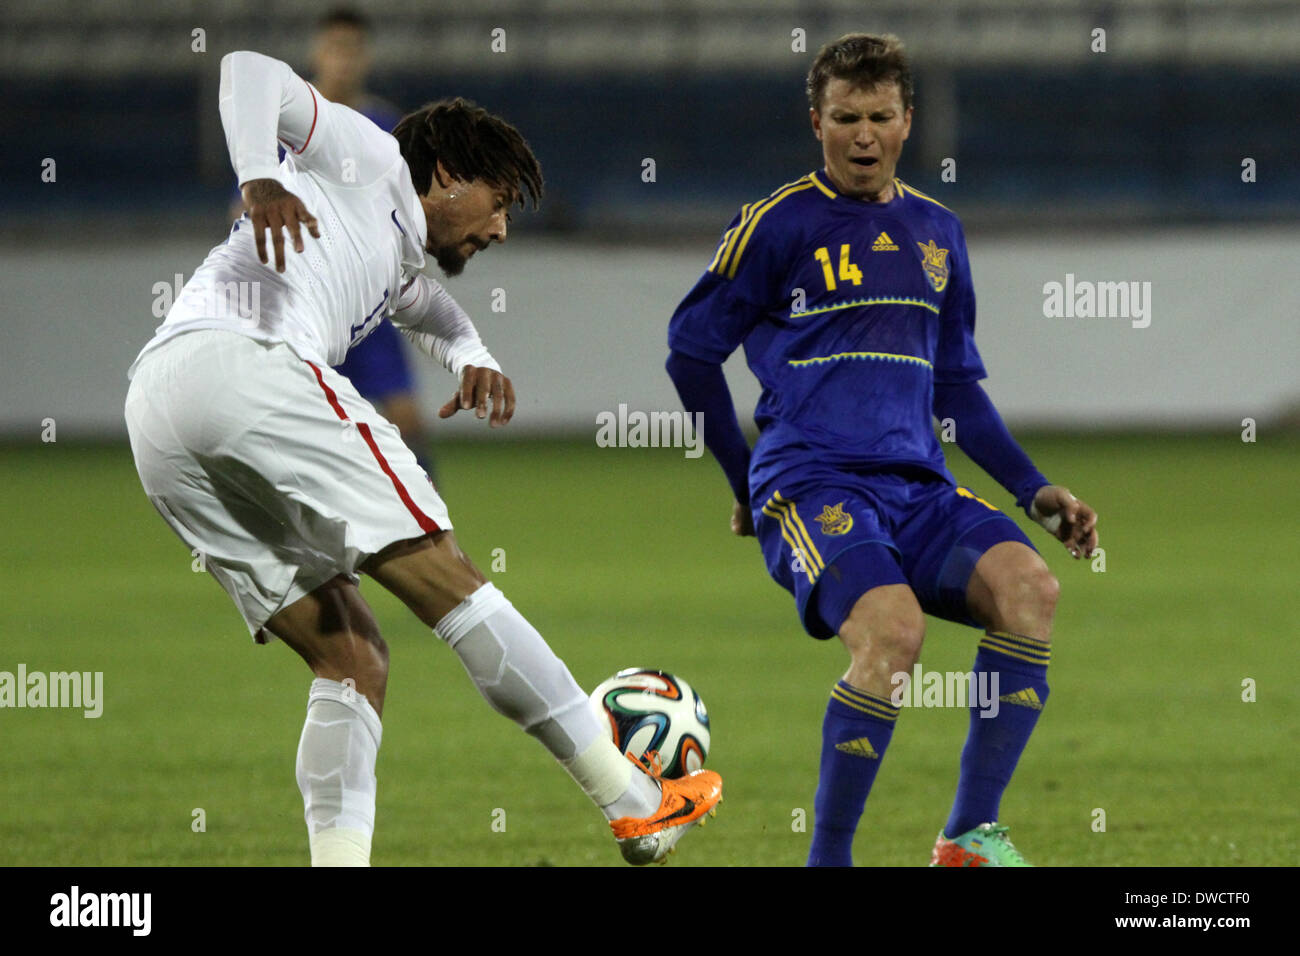 Cyprus, Larnaka- March 05,2014: Ukraine's   Ruslan Rotam fight  for the ball with USA's Jermaine Jones  during the friendly game  between Ukraine  and USA at the Antonis Papadopoulos  stadium in Larnaka on March  05,2014 Credit:  Yiannis Kourtoglou/Alamy Live News Stock Photo